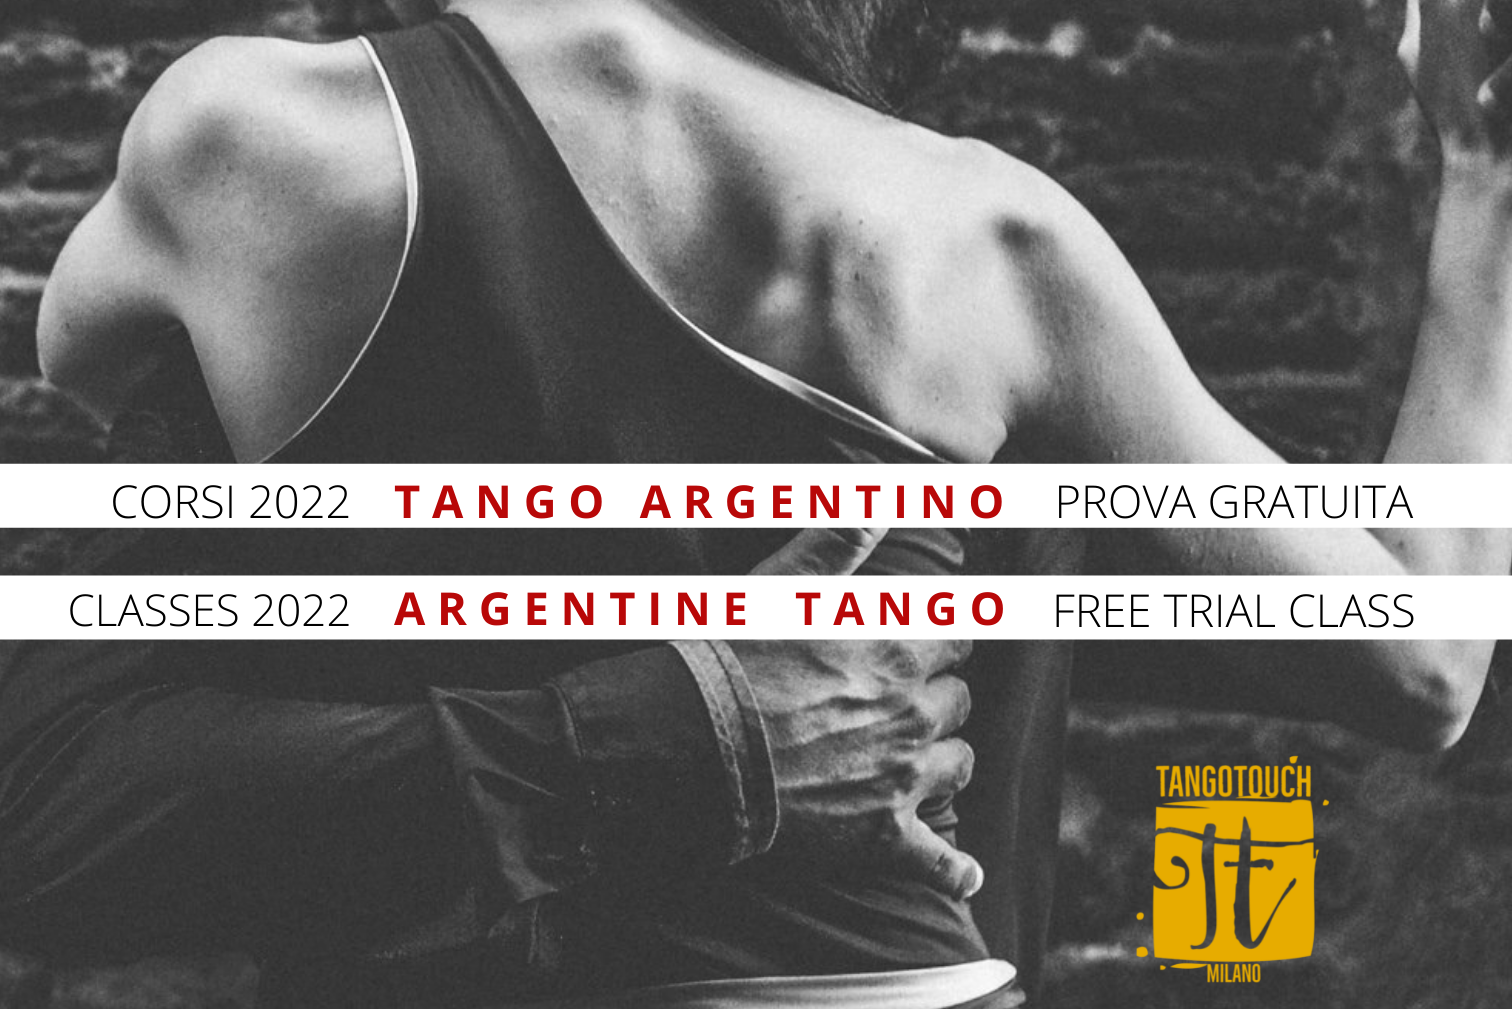 New Tango Classes 2022 by Tango Touch